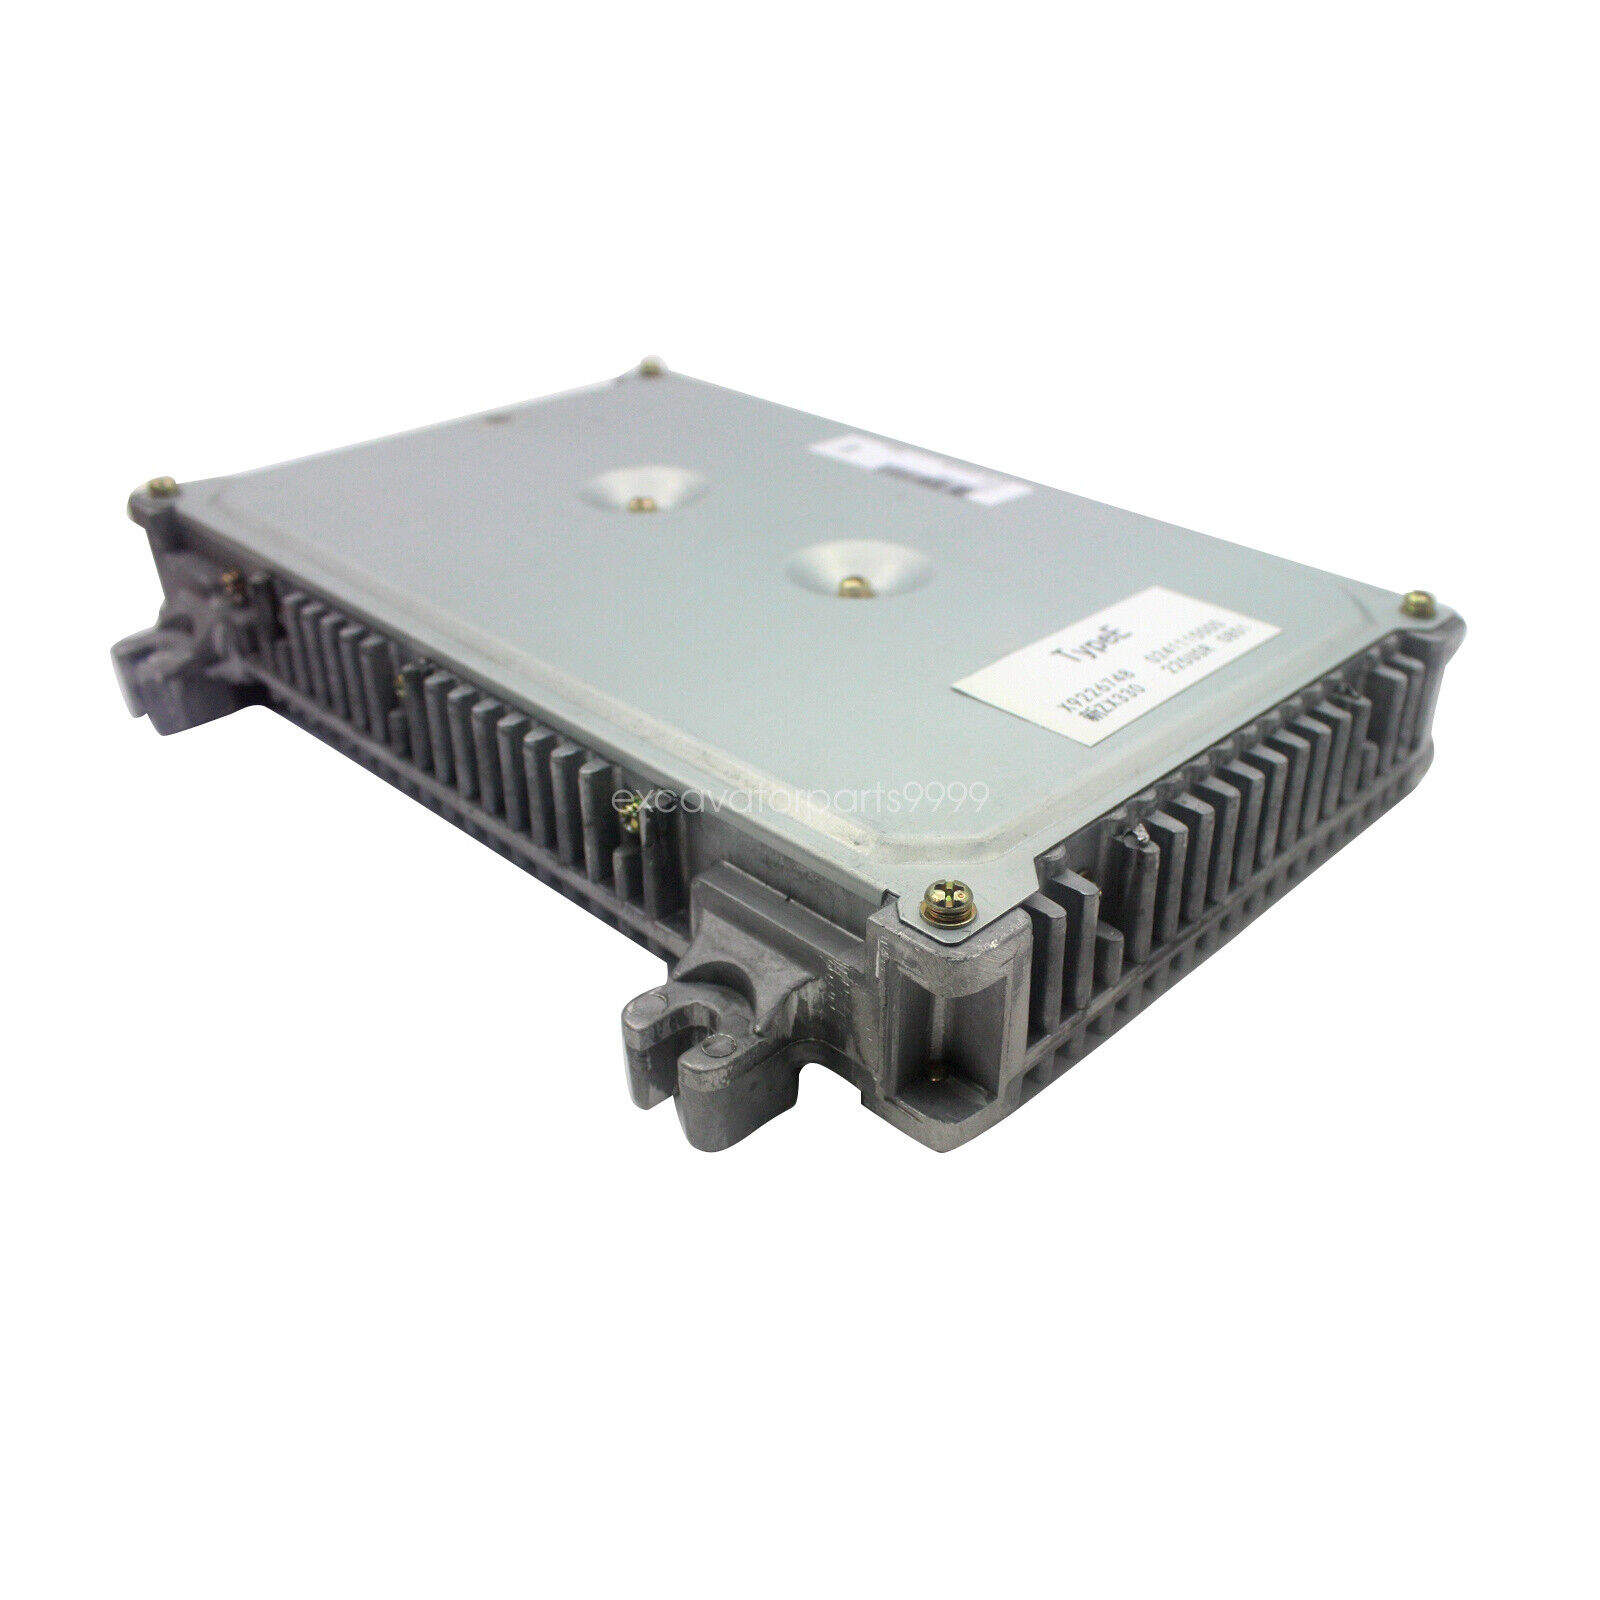 CPU Controller 9226748 4445494 For Hitachi ZX200-1 ZX240 ZX225USR, 1 year  wty